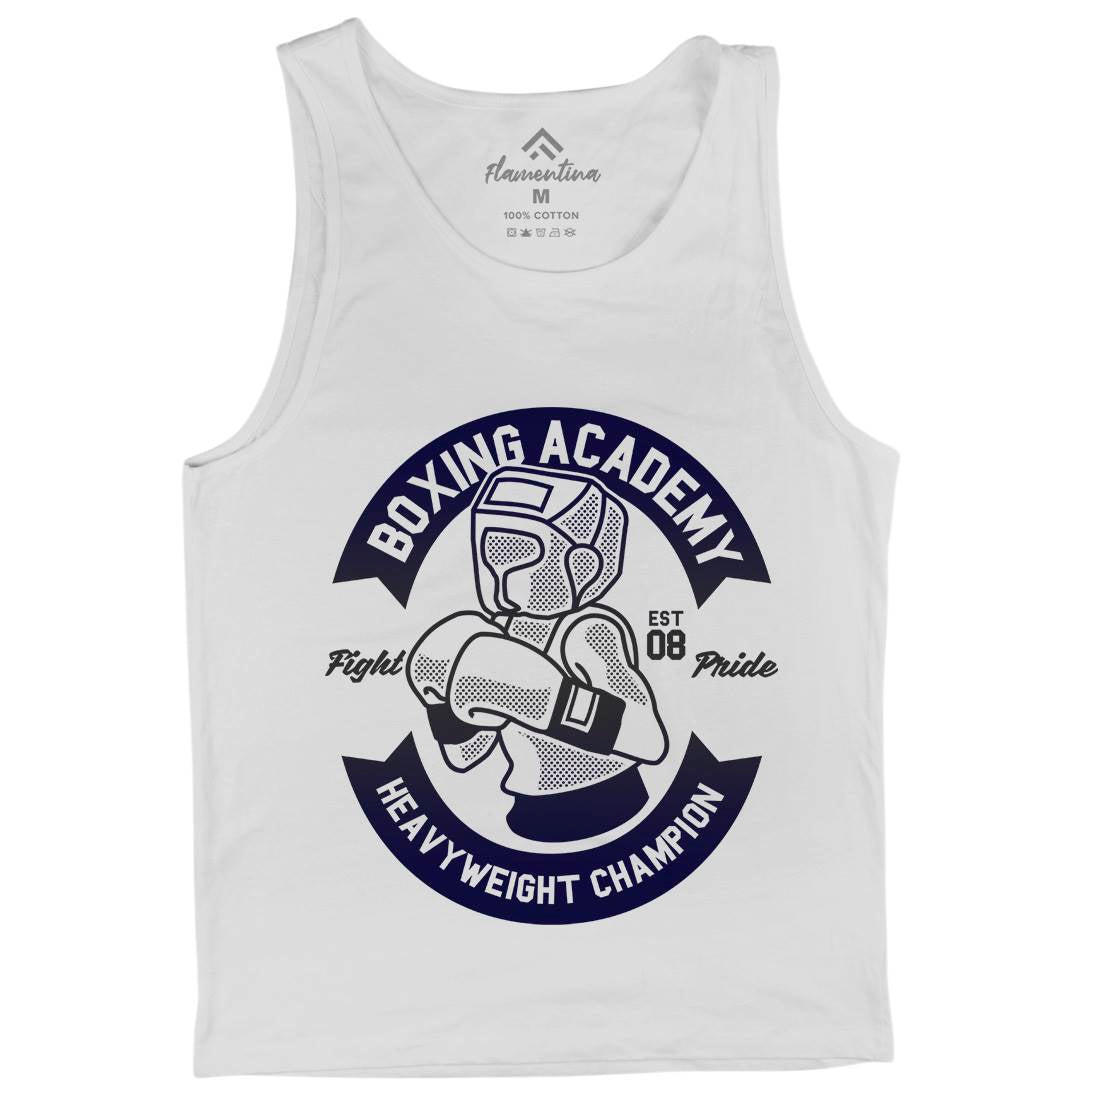 Boxing Academy Mens Tank Top Vest Gym A213